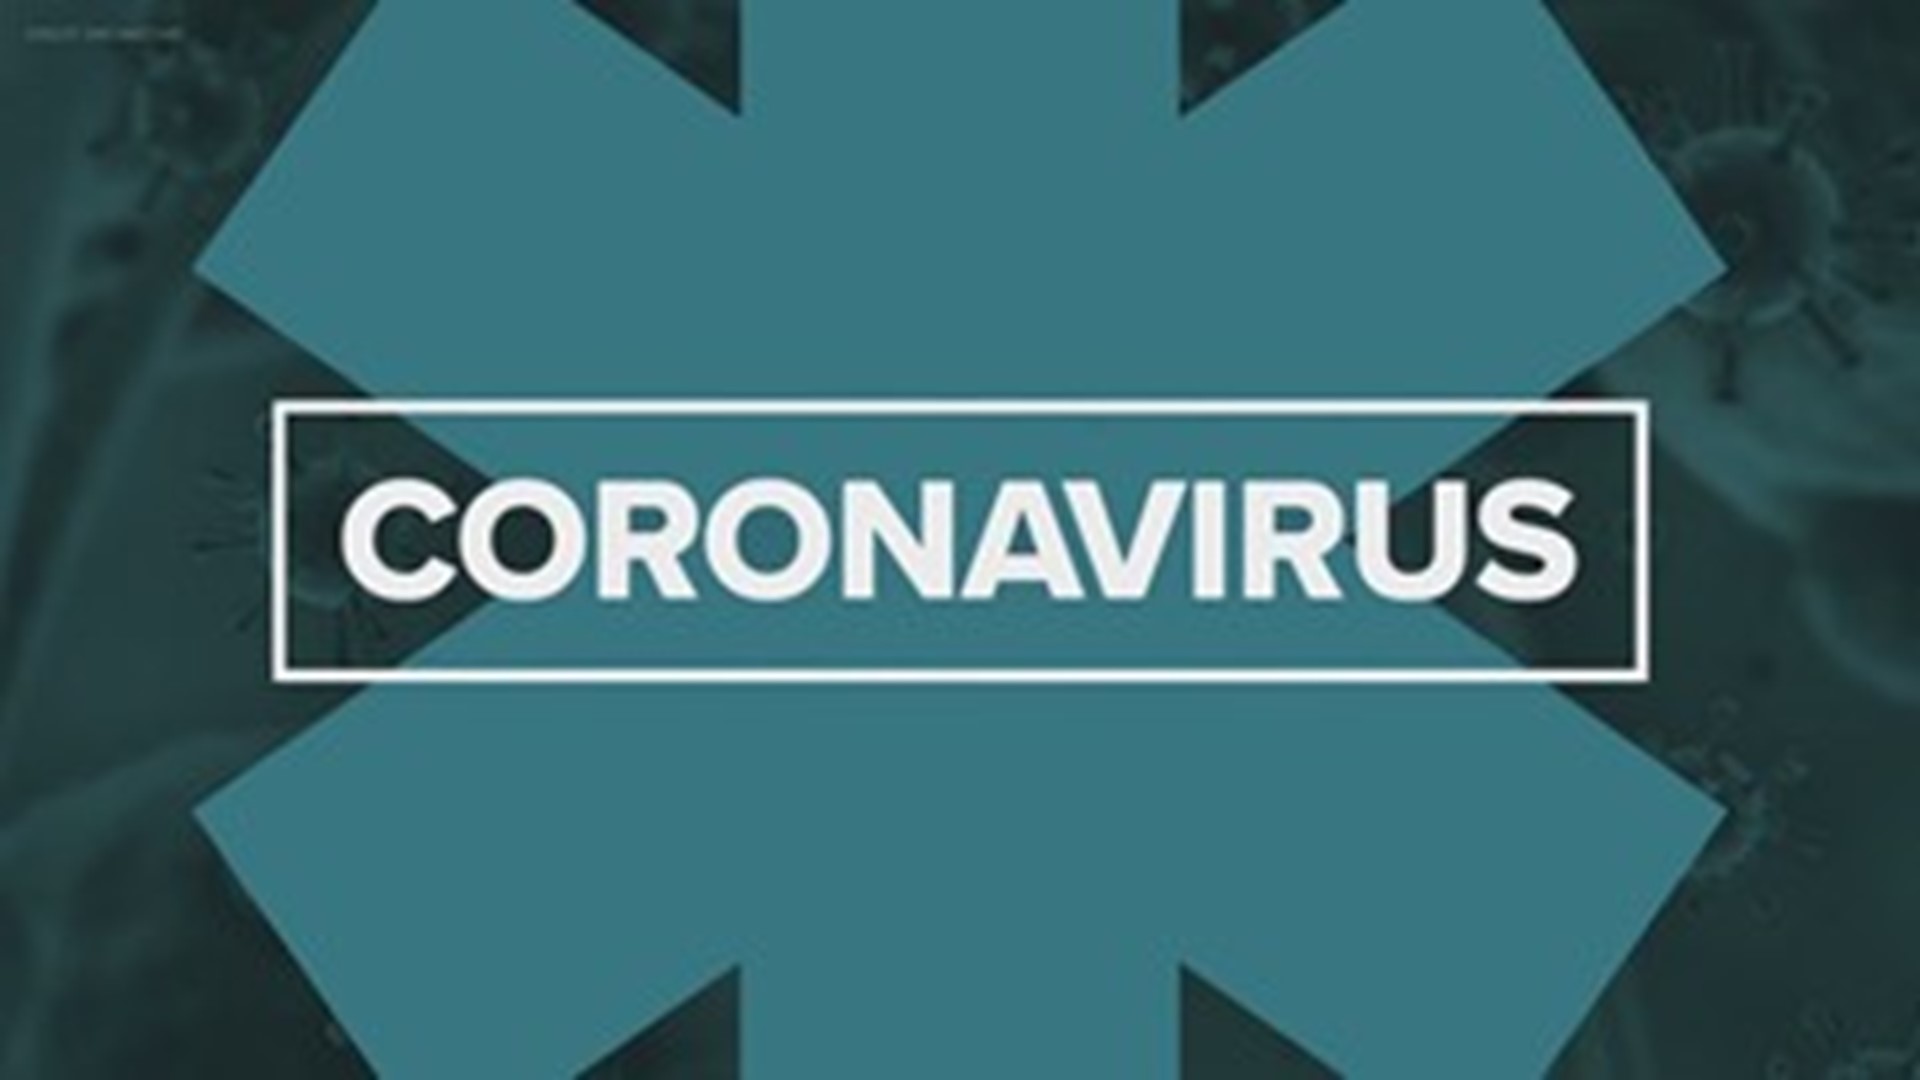 Indiana coronavirus updates: Some Marion County schools return to in-person learning Monday, Indiana numbers, FDA considering half-doses for vaccine — 1/4/21 Sunrise